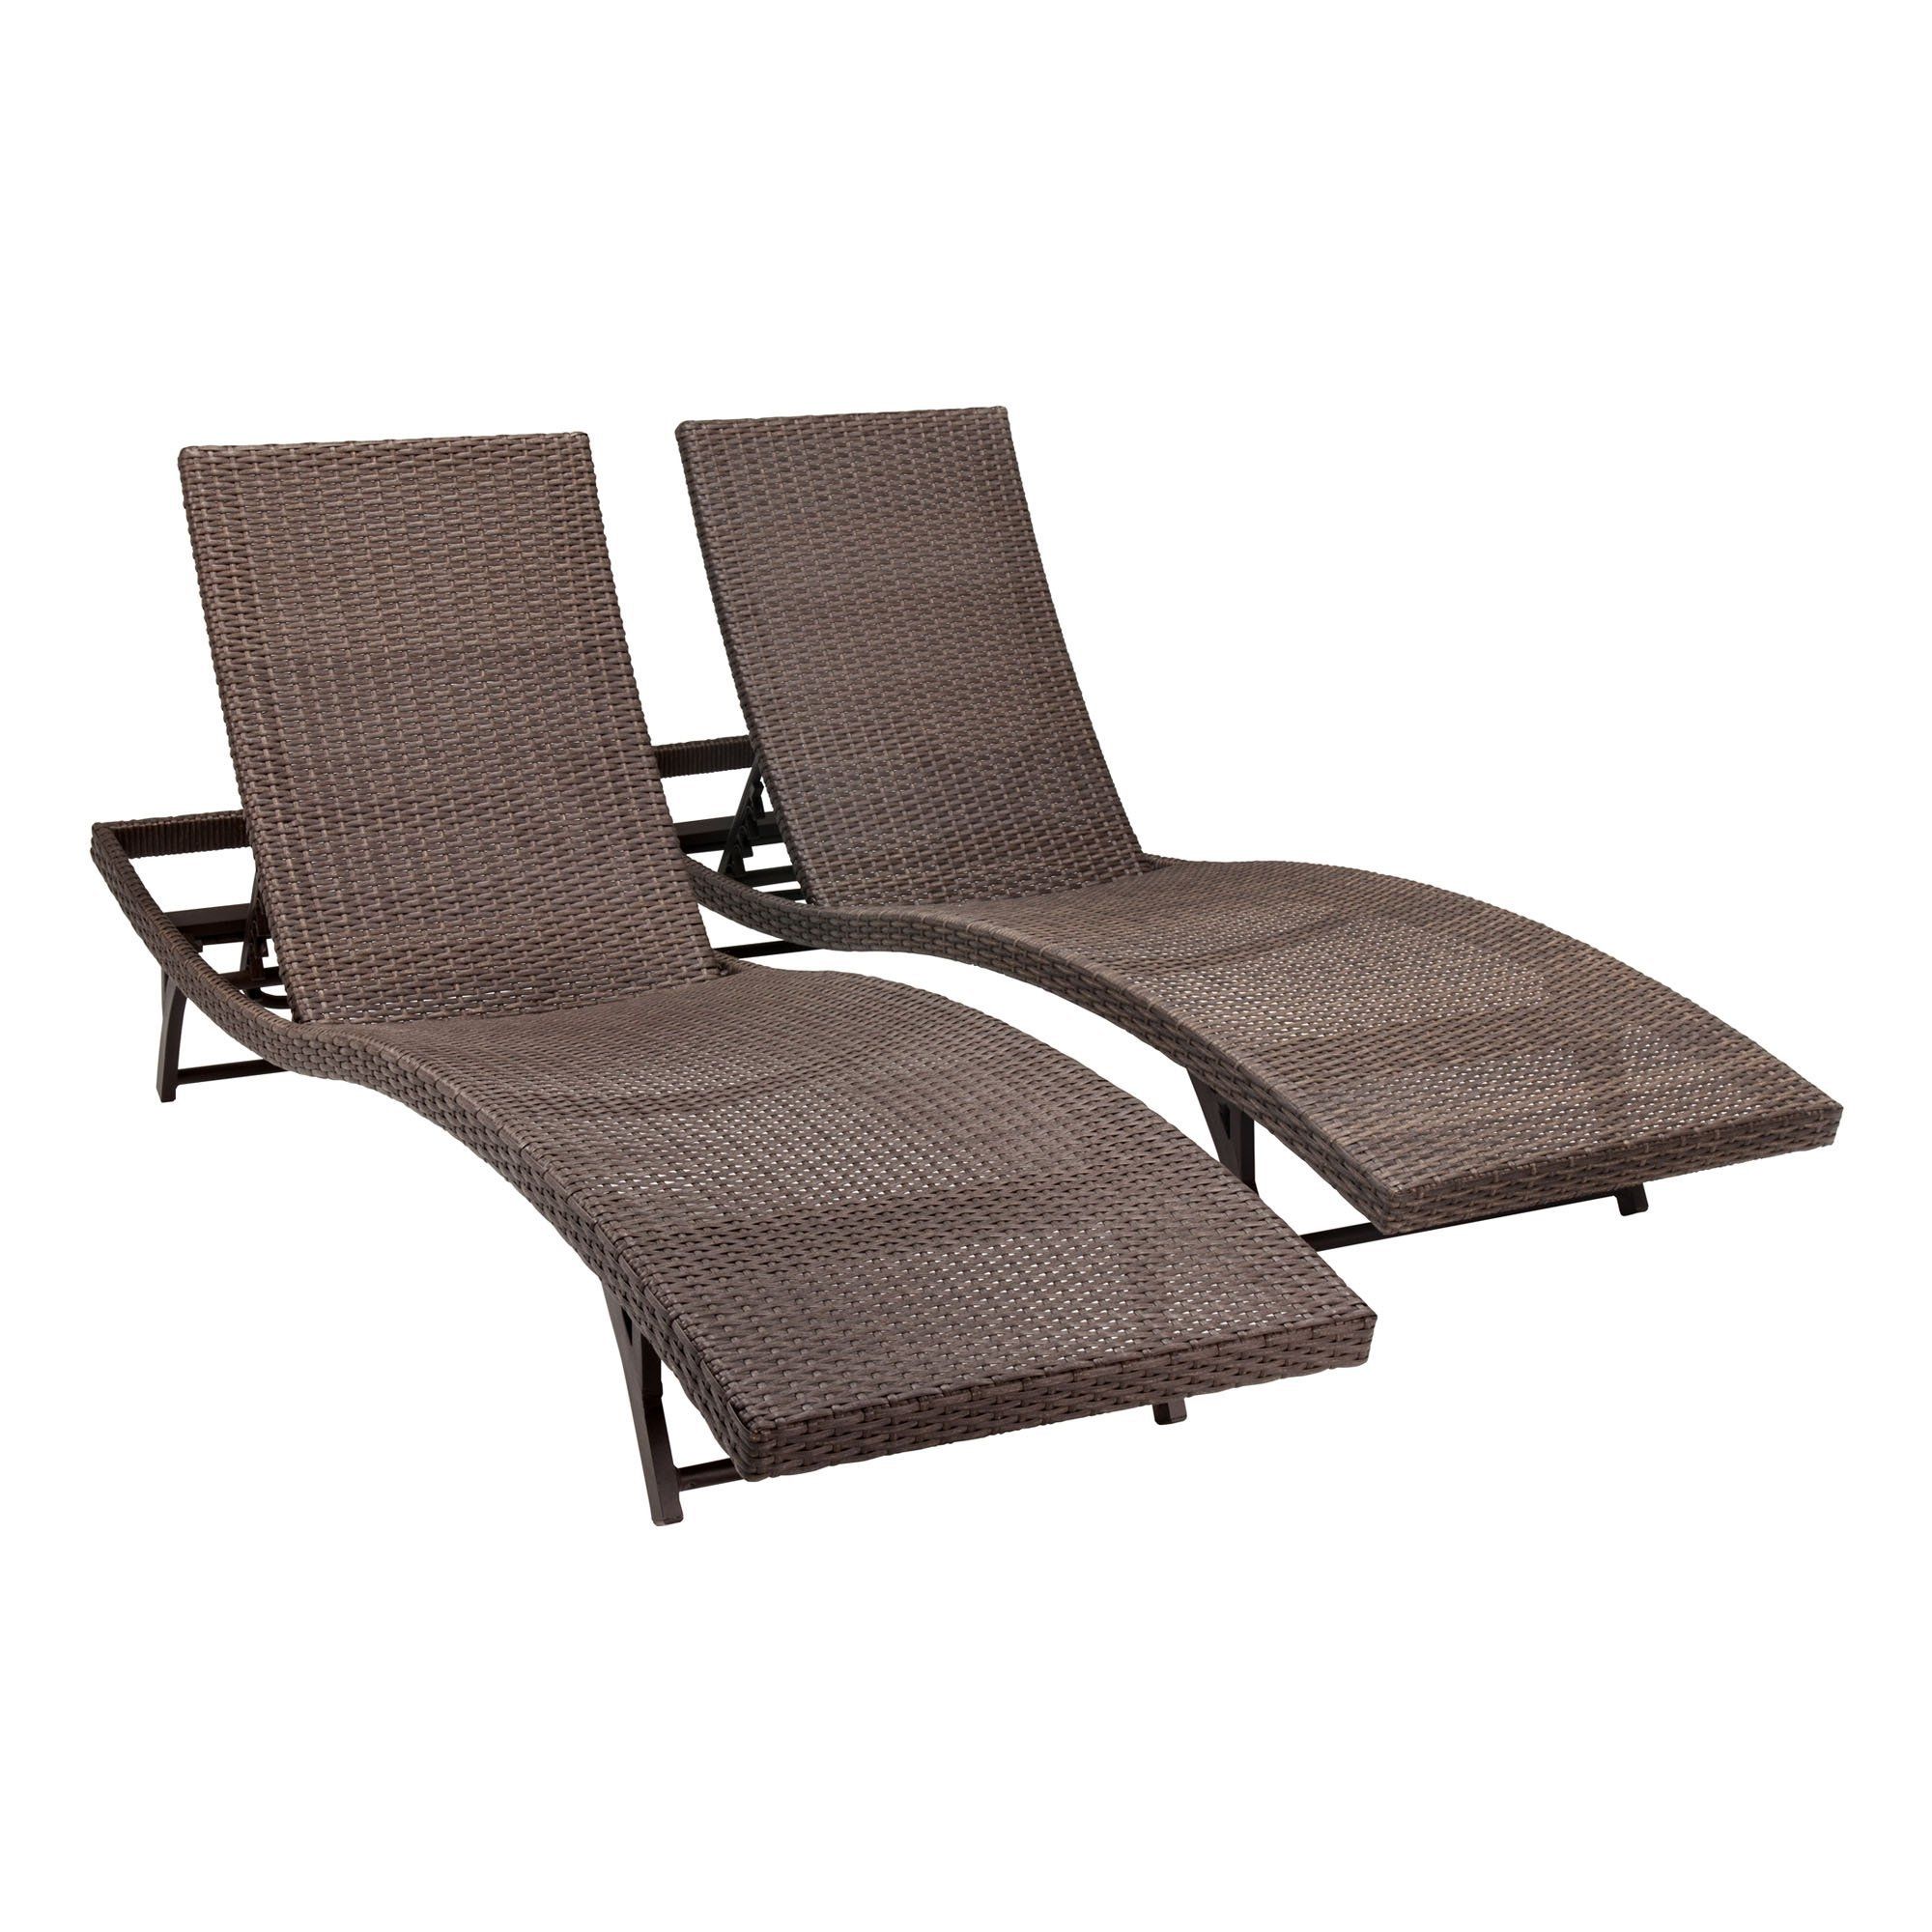 Outdoor Chaise Lounge Chairs Ideas : Best Outdoor Chaise Lounge With Regard To Most Recent Aluminum Chaise Lounge Chairs (View 10 of 15)